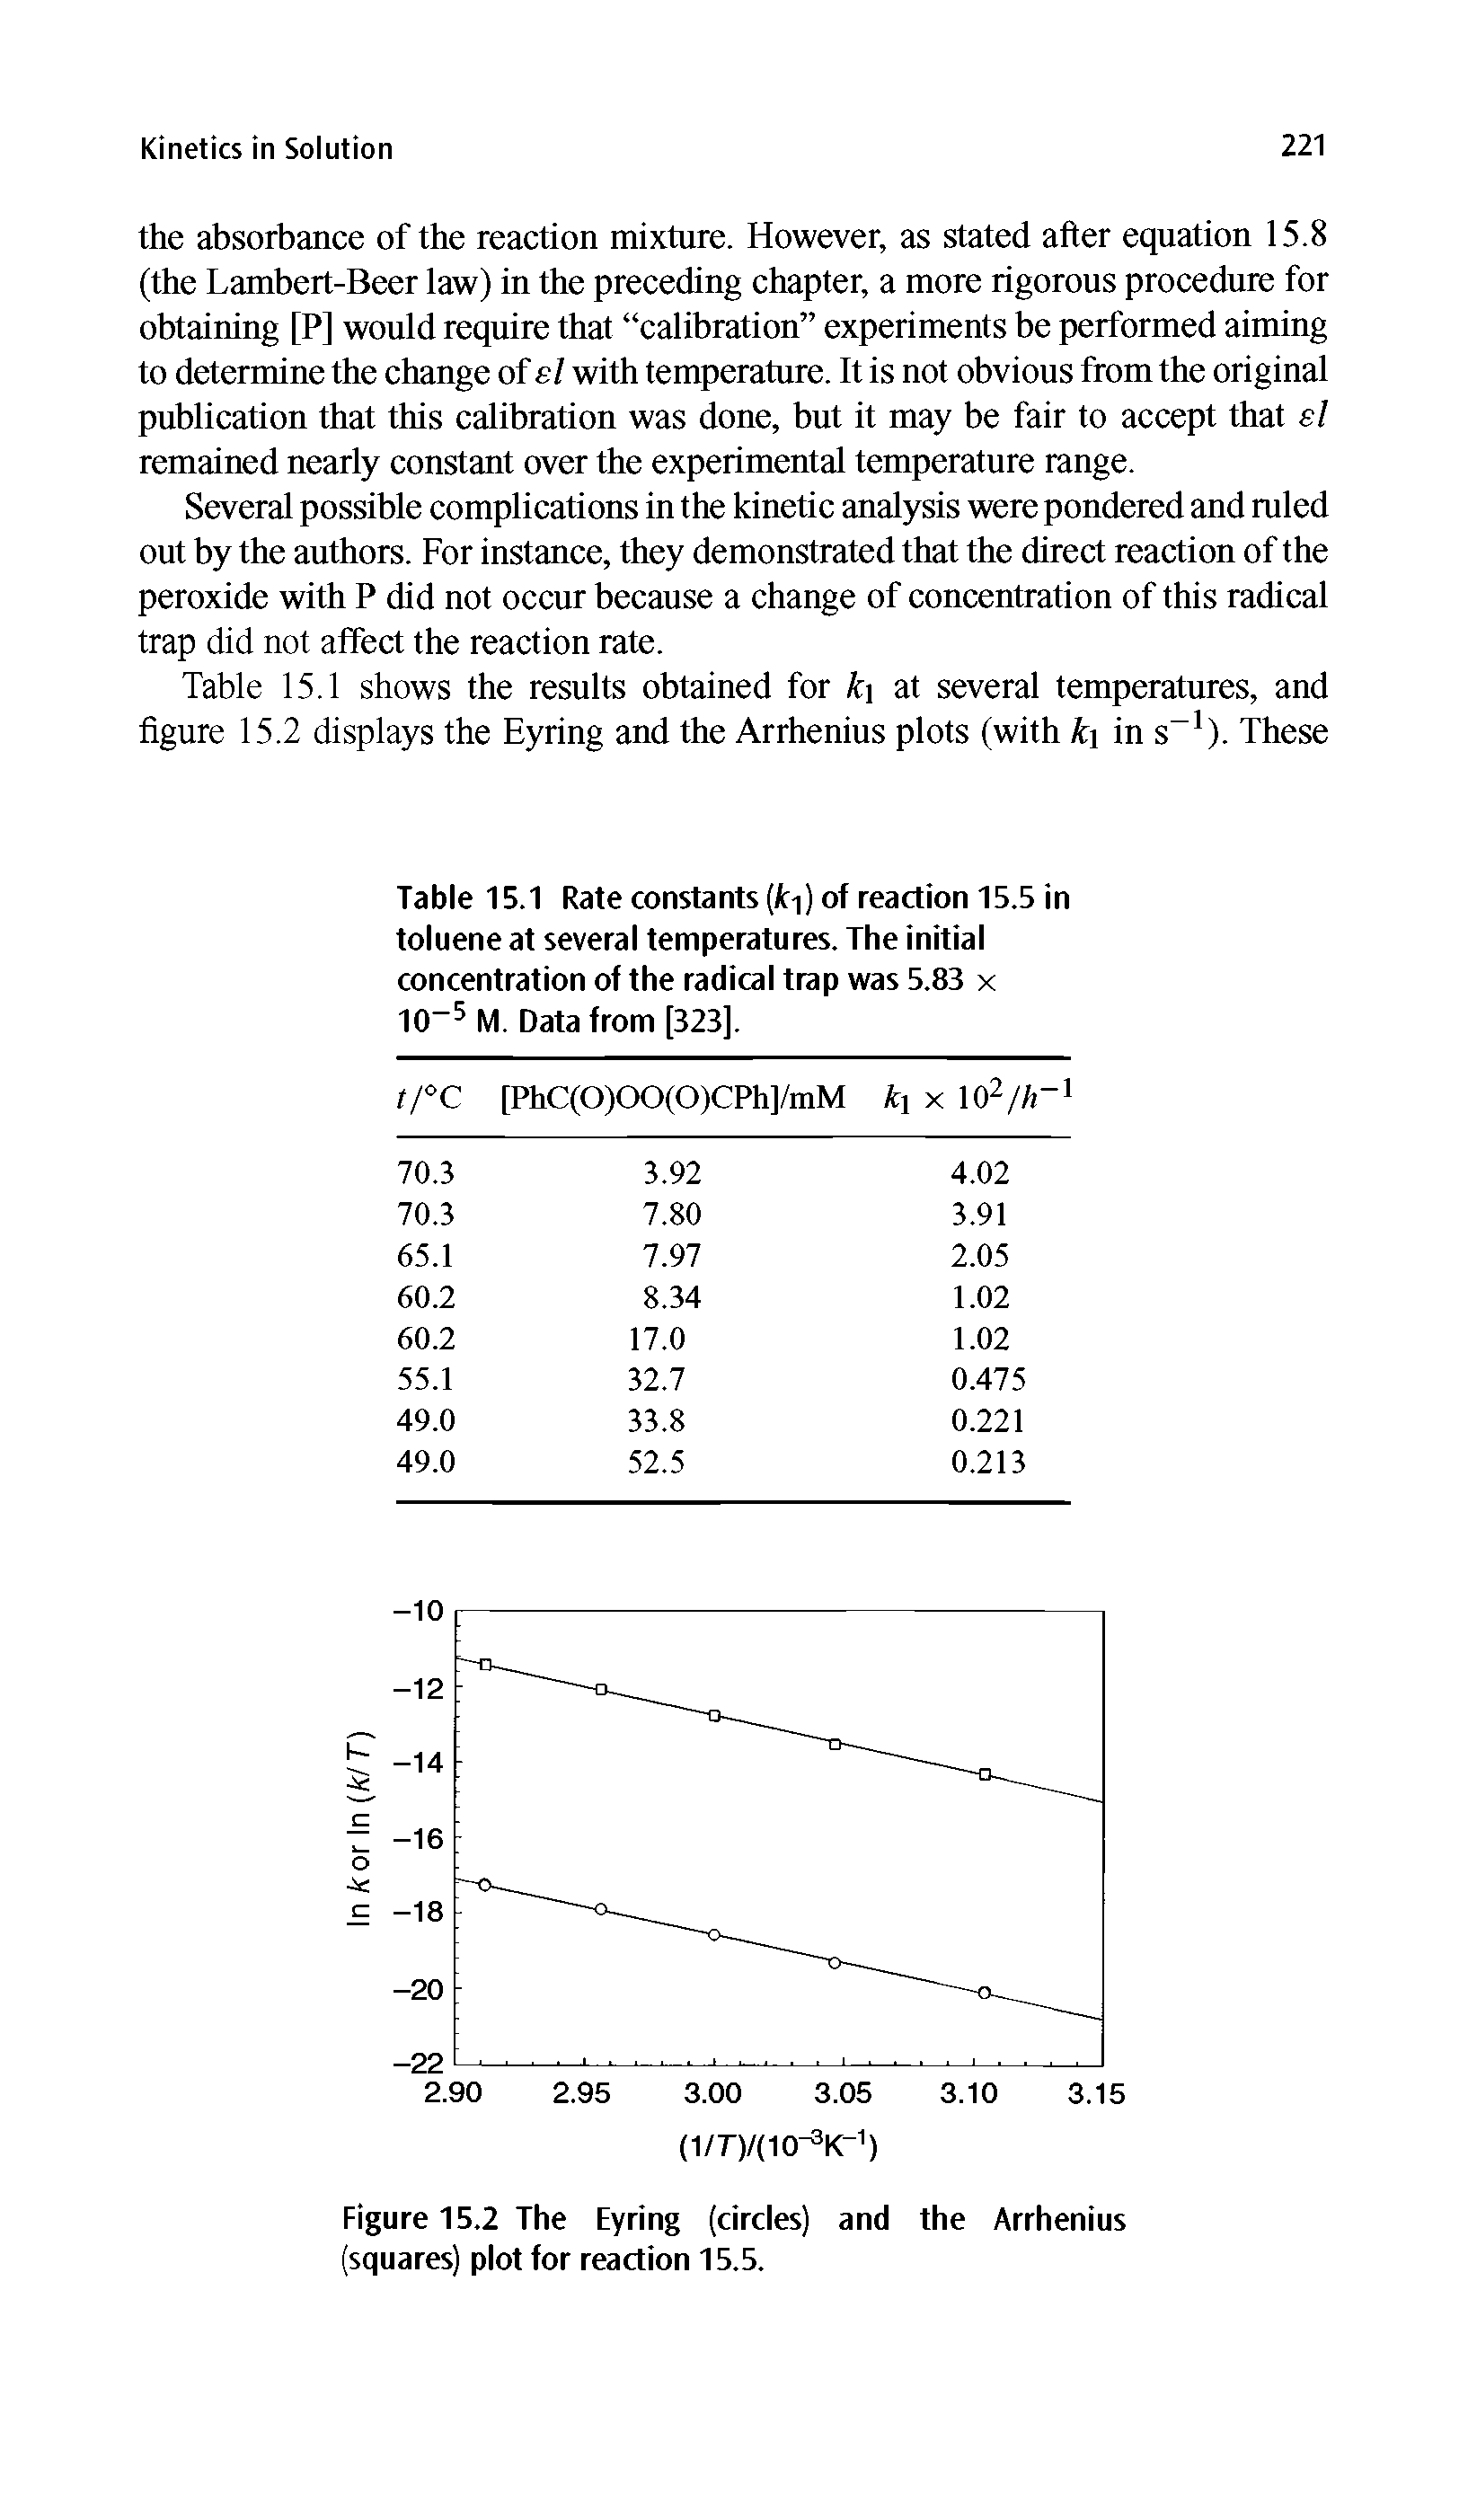 Table 15.1 Rate constants (k- ) of reaction 15.5 in toluene at several temperatures. The initial concentration of the radical trap was 5.83 x 10-5 M. Data from [323],...